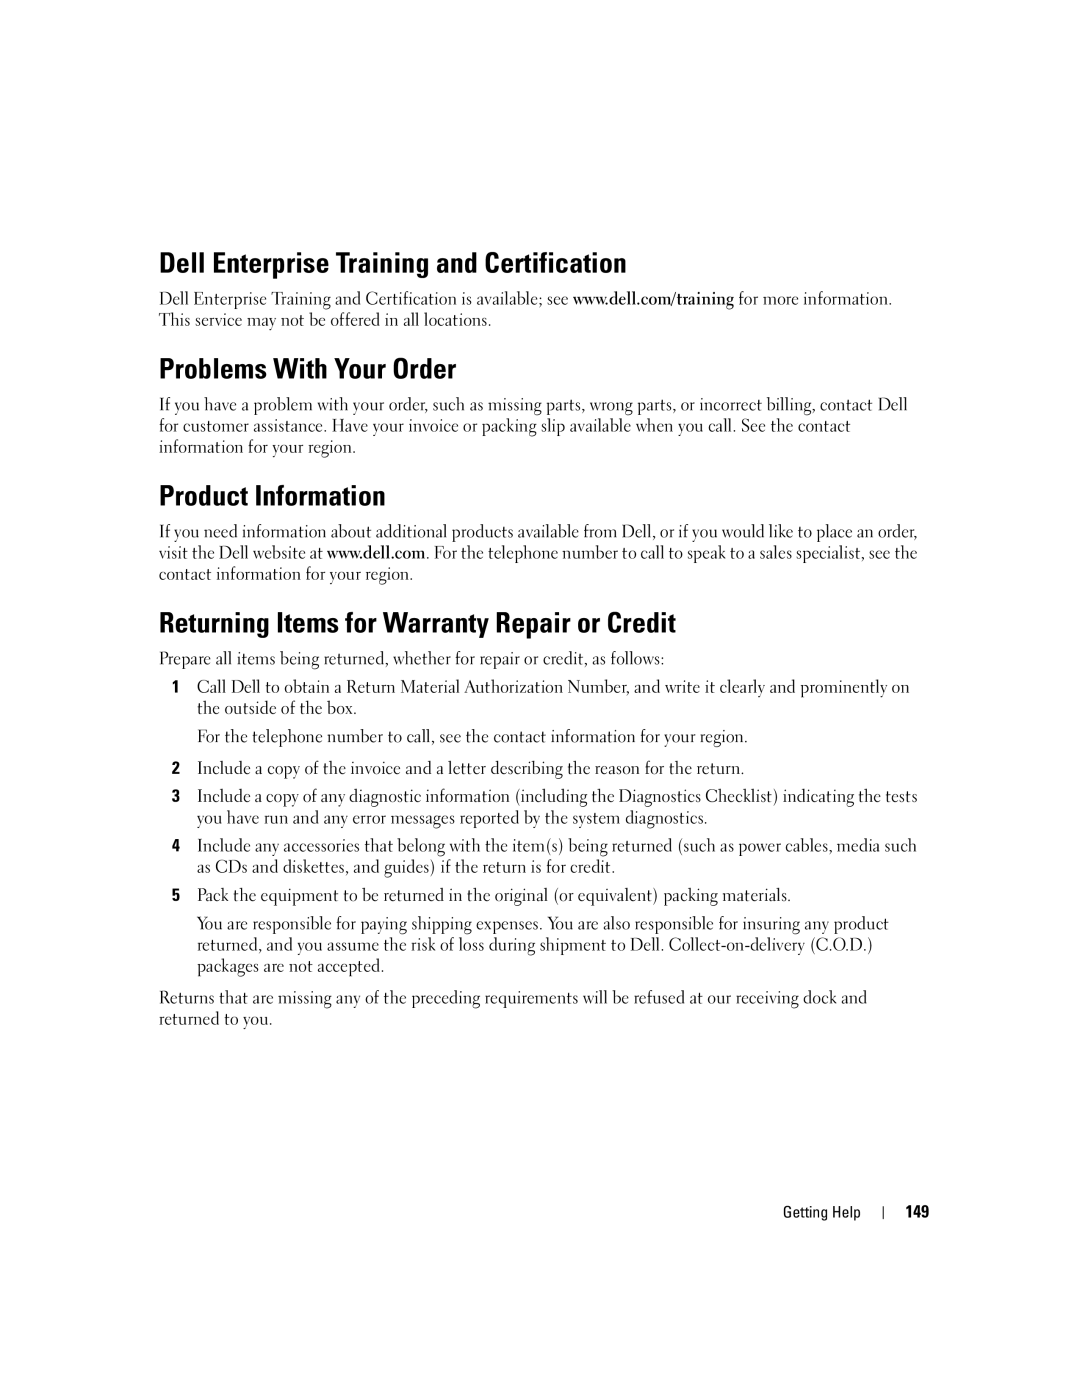 Dell 2900 owner manual Dell Enterprise Training and Certification, Problems With Your Order, Product Information 